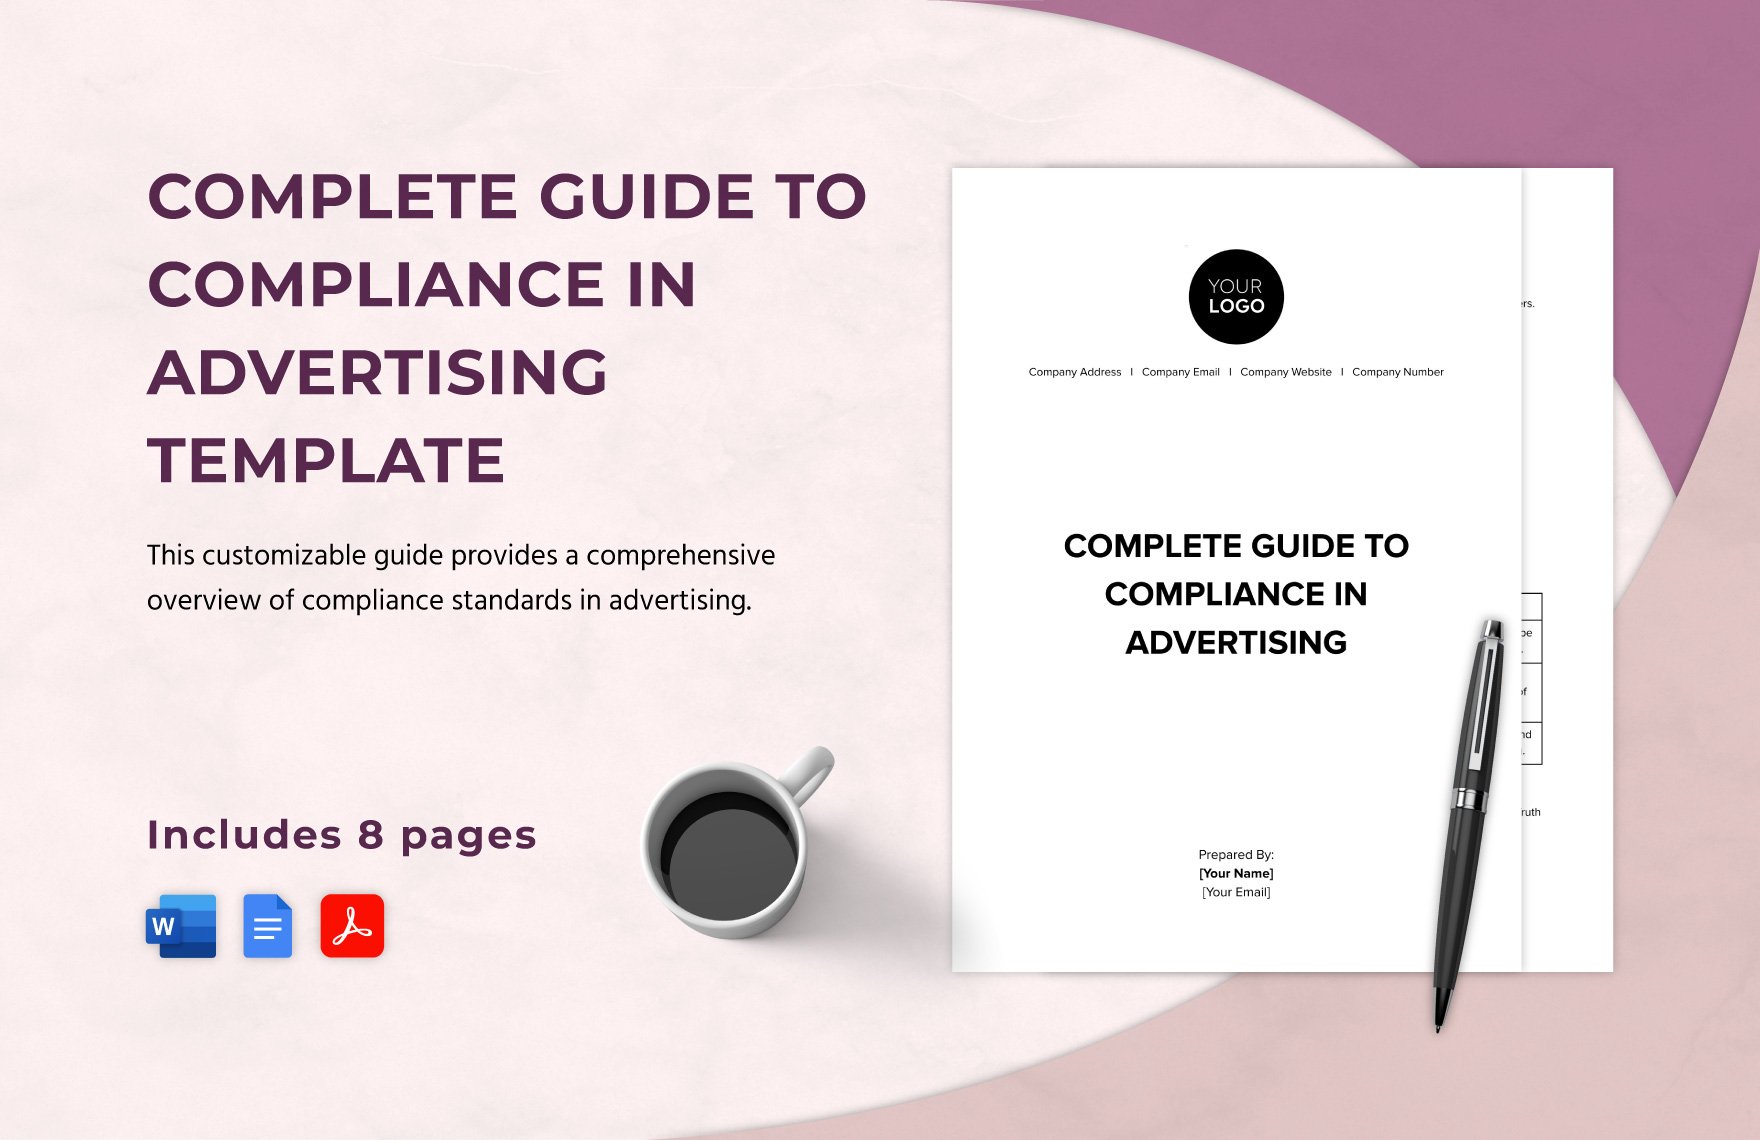 Complete Guide to Compliance in Advertising Template